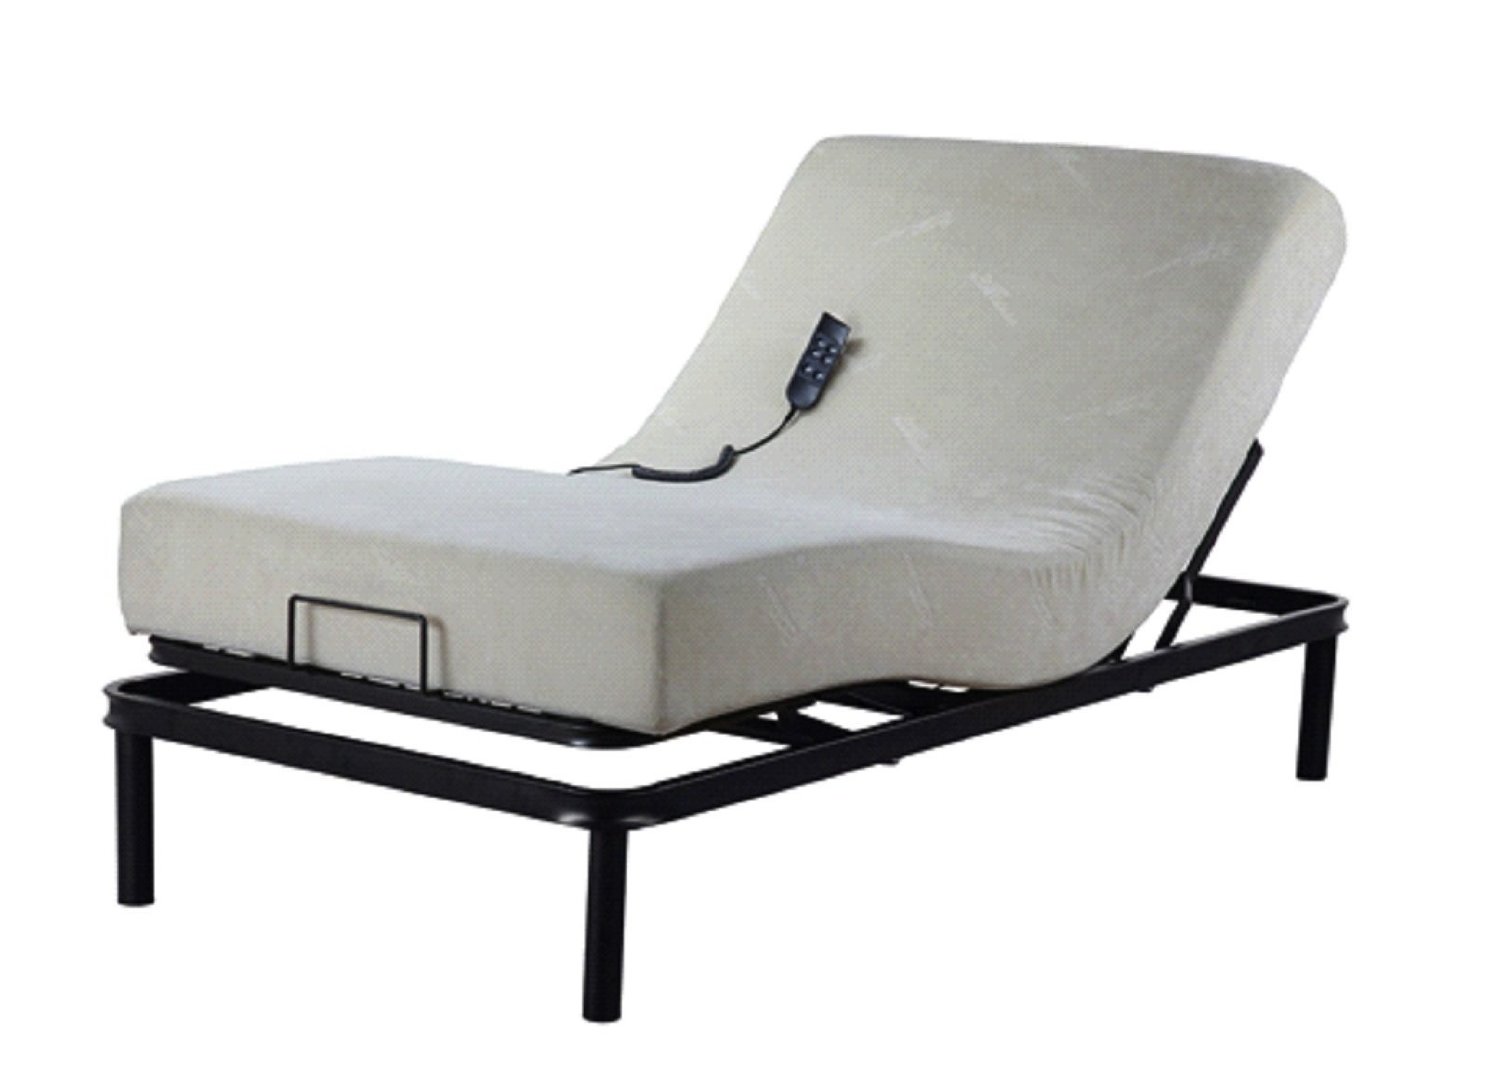 discount inexpensive city adjustable bed cheap power base fundation motorized frame discount sale price cost